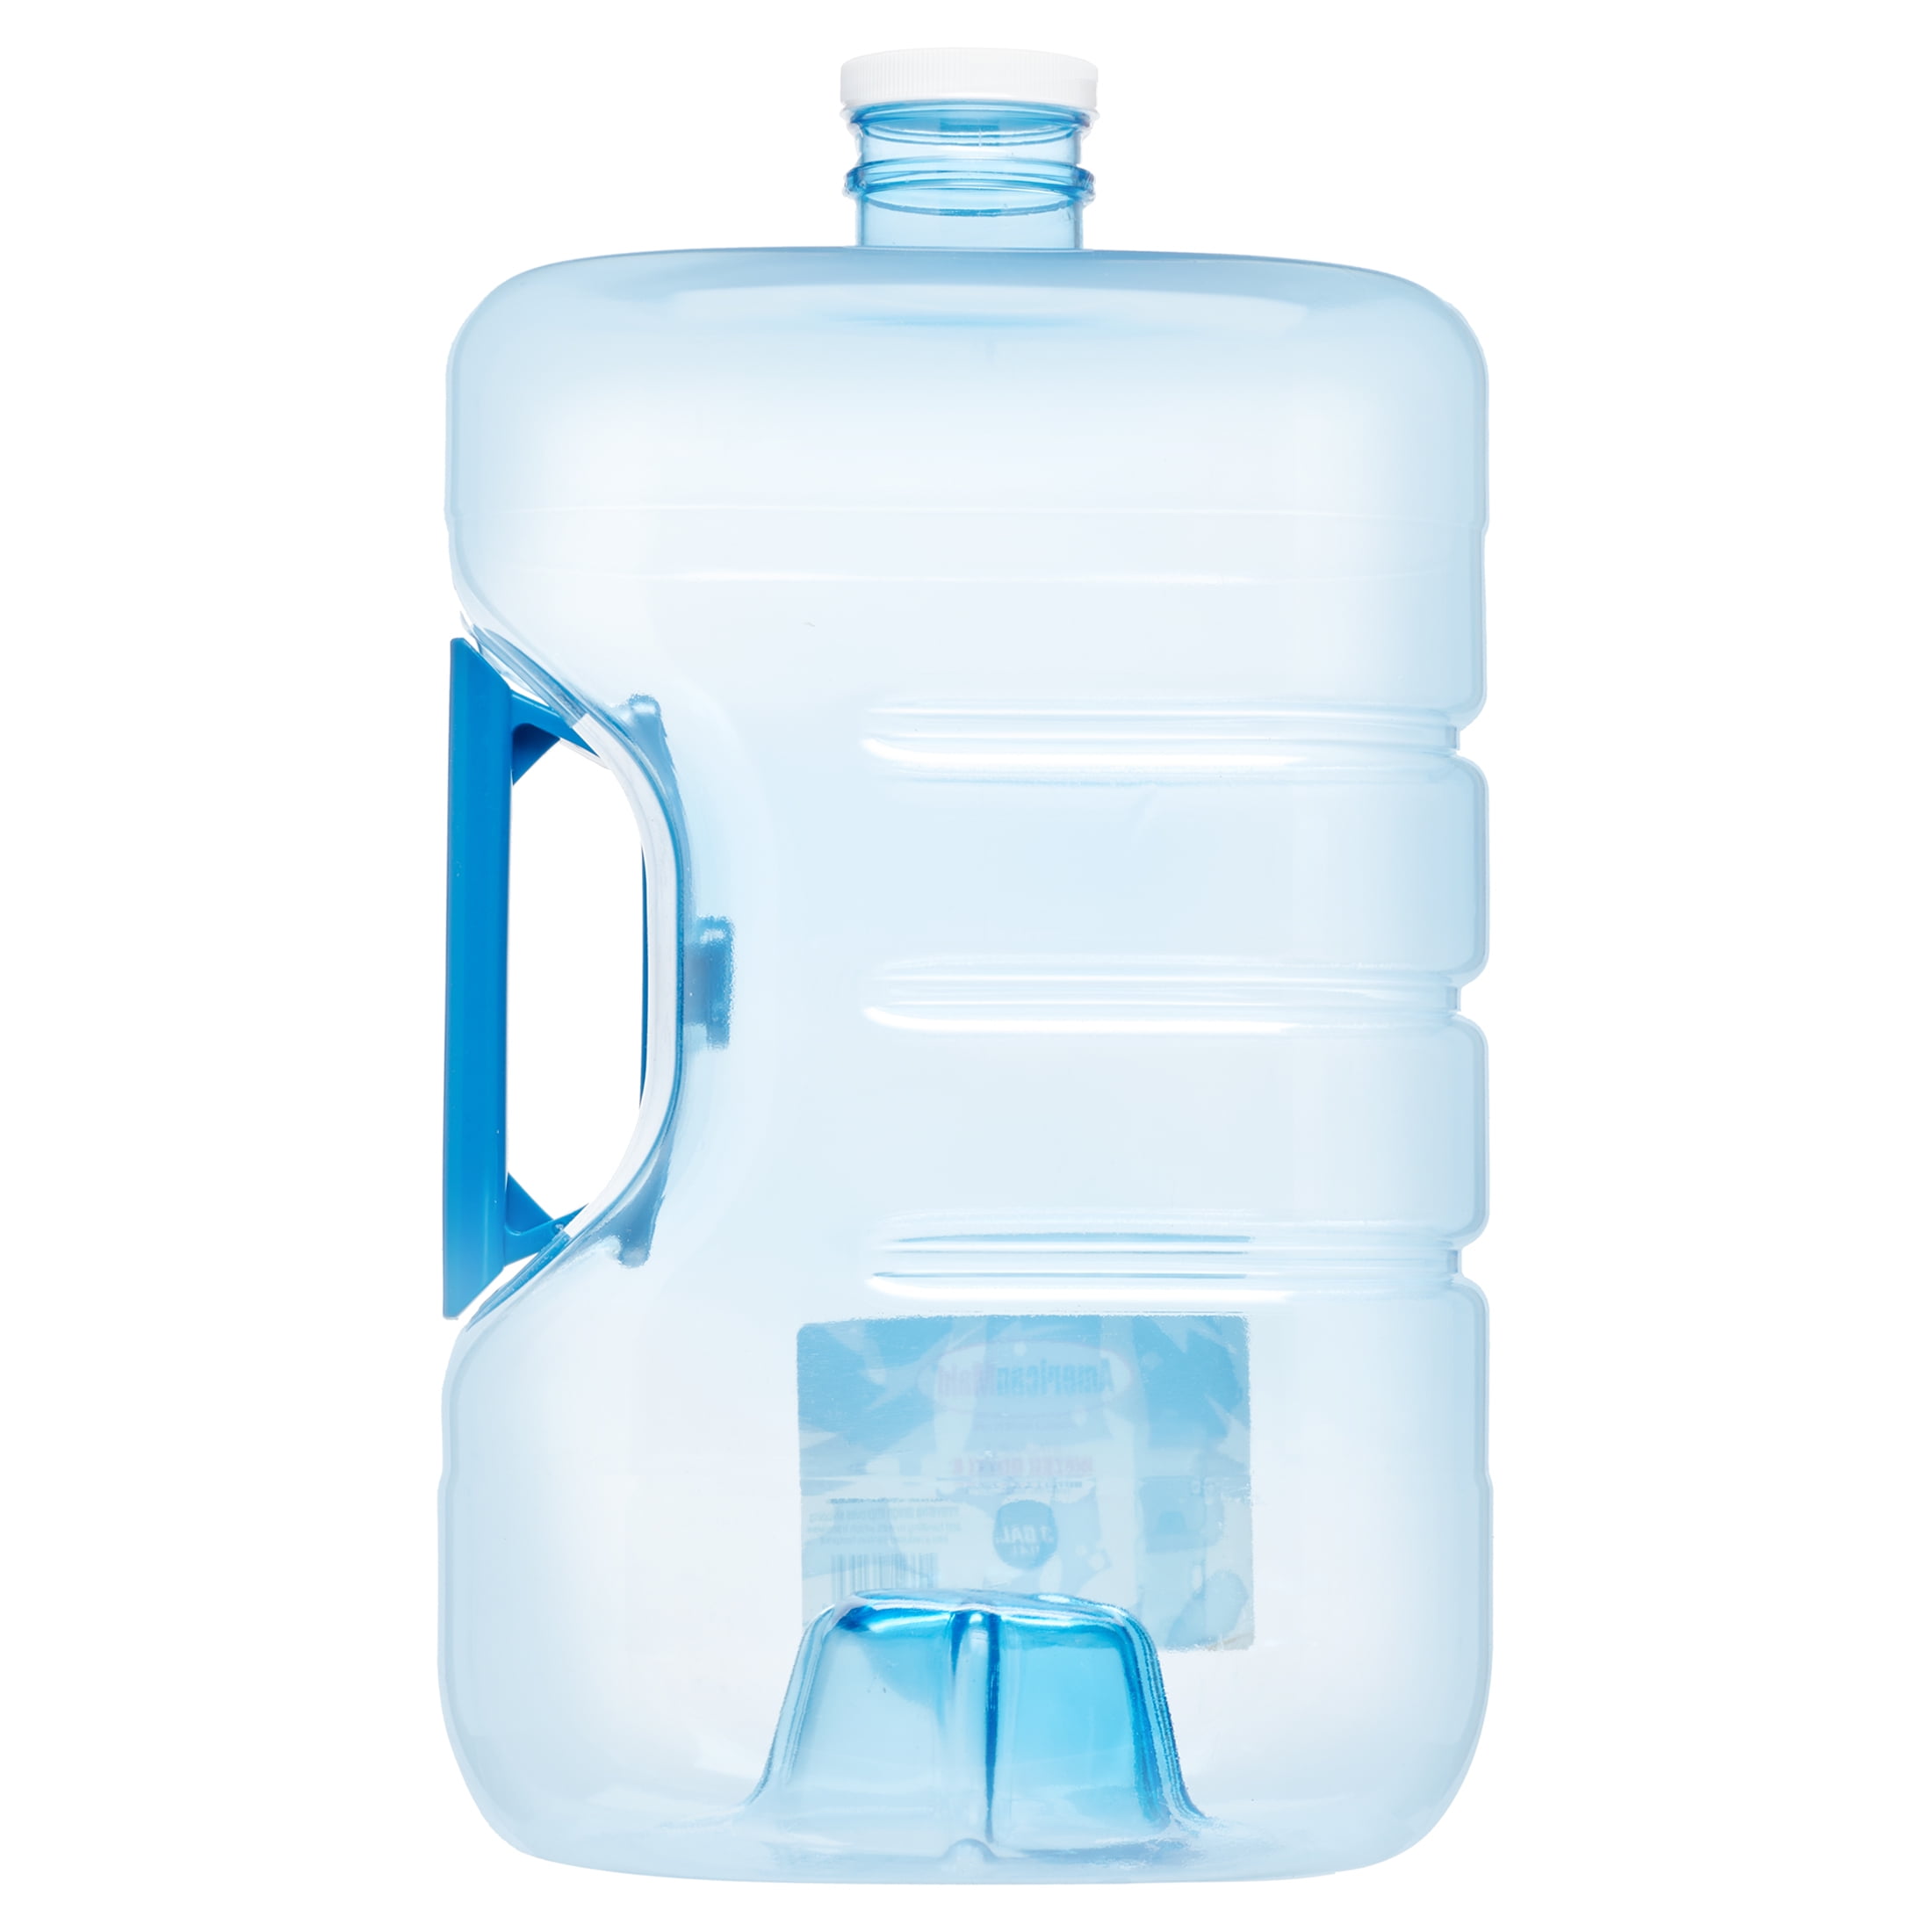 Champs 3 Gallon Jug with Lid and Spout - Aguas Frescas Vitrolero Plastic Water Container - 3 Gallon Drink Dispenser - Large Beverage Dispenser Ideal